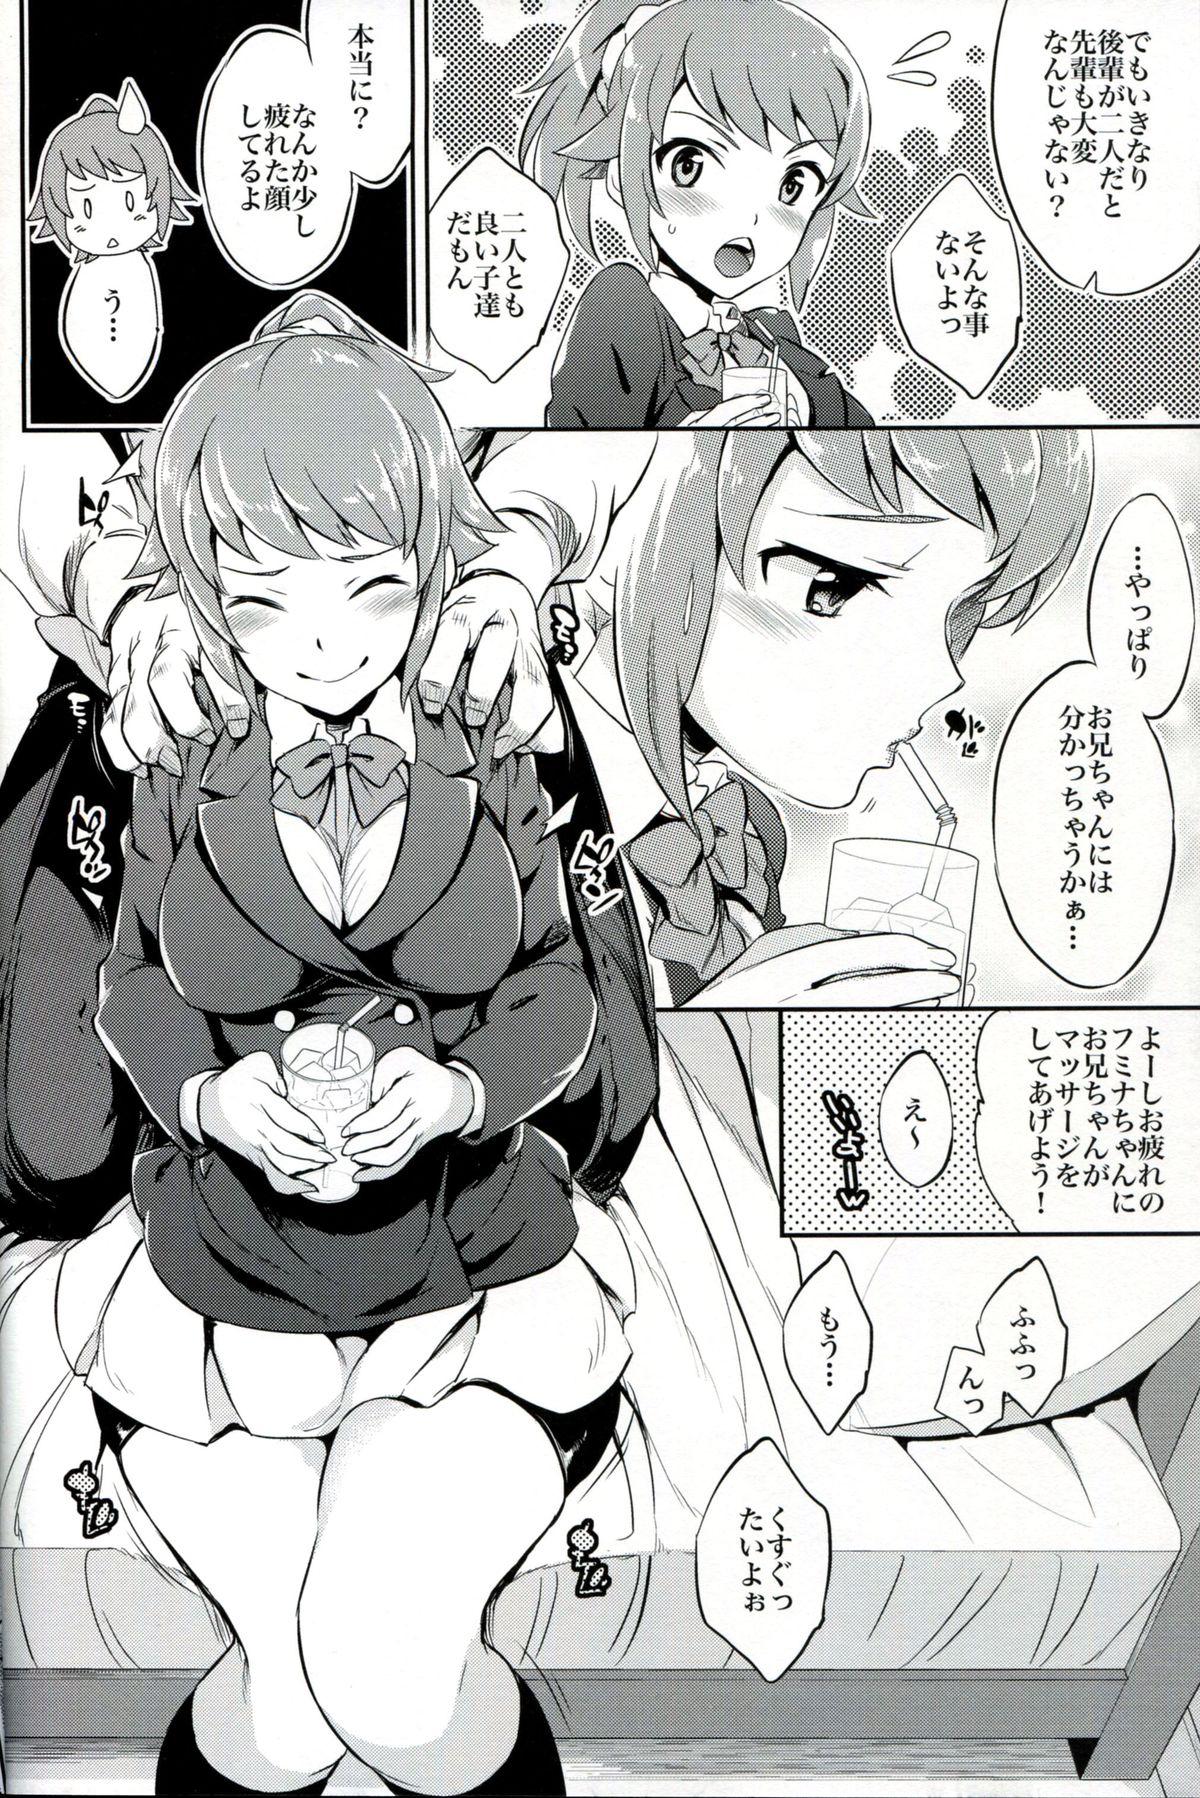 Soloboy (C87) [Crazy9 (Ichitaka)] C9-15 Fumina-senpai to Mob Onii-chan (Gundam Build Fighters Try) - Gundam build fighters try Gay Shaved - Page 5